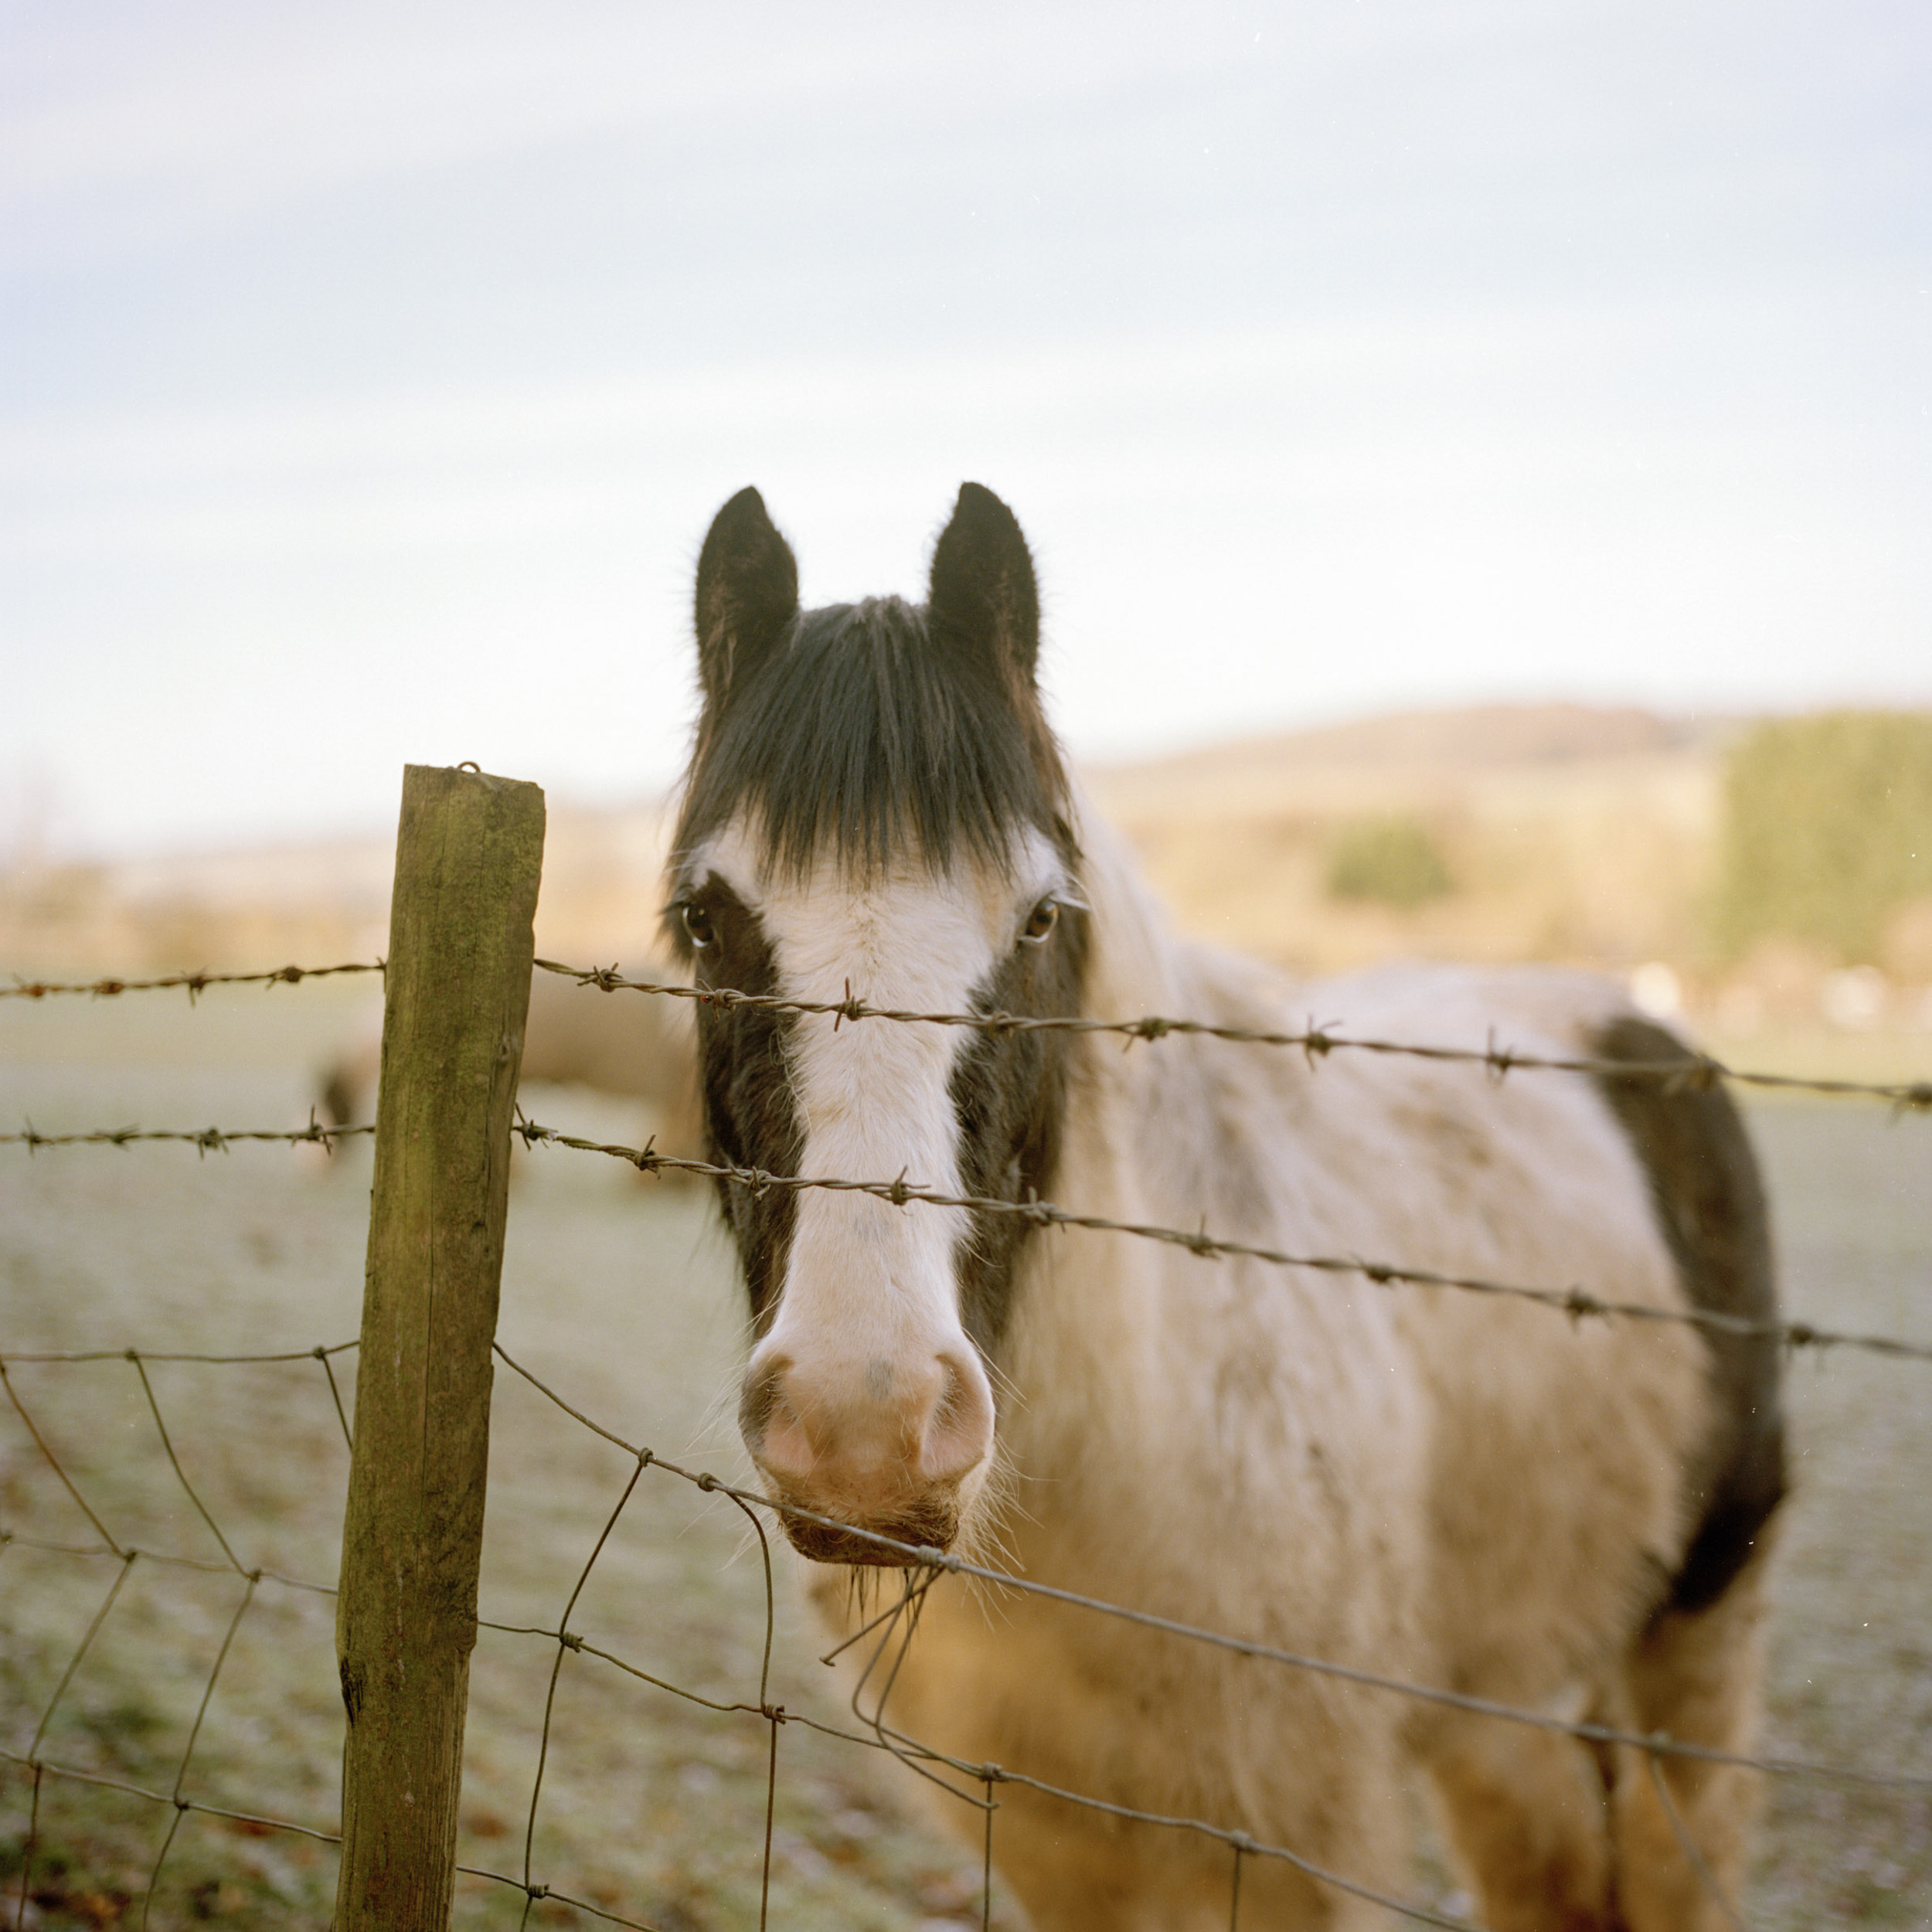 A-LONELY-HORSE-ON-A-FROSTY-MORNING-BEHIND-SOME-BARB-WIRE-FENCE-IN-THE-COUNTRYSIDE-UK